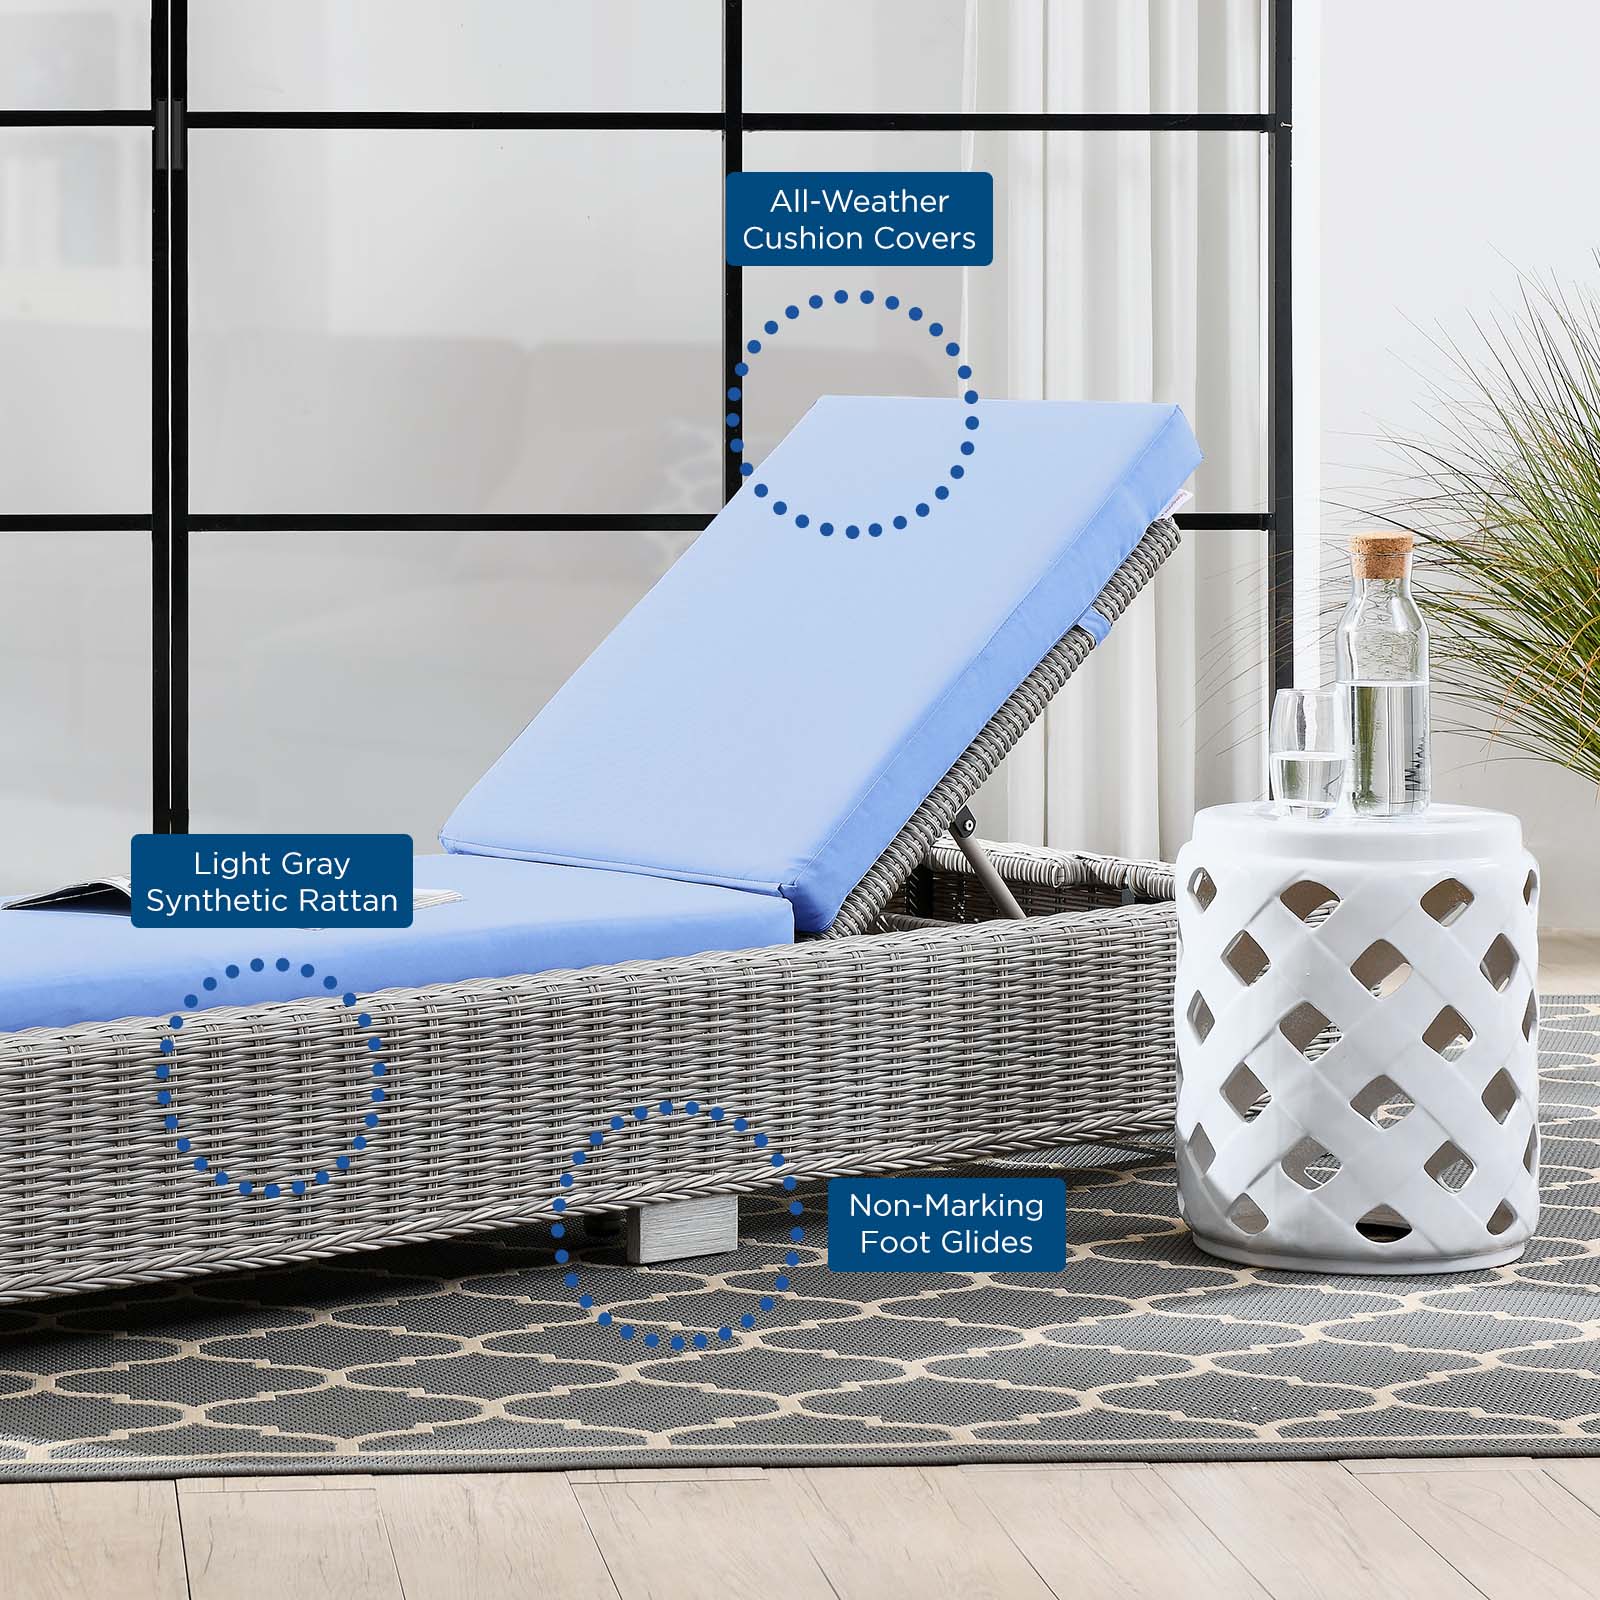 Lounge Chair Chaise, Rattan, Wicker, Light Grey Gray Light Blue, Modern Contemporary Urban Design, Outdoor Patio Balcony Cafe Bistro Garden Furniture Hotel Hospitality - image 5 of 9